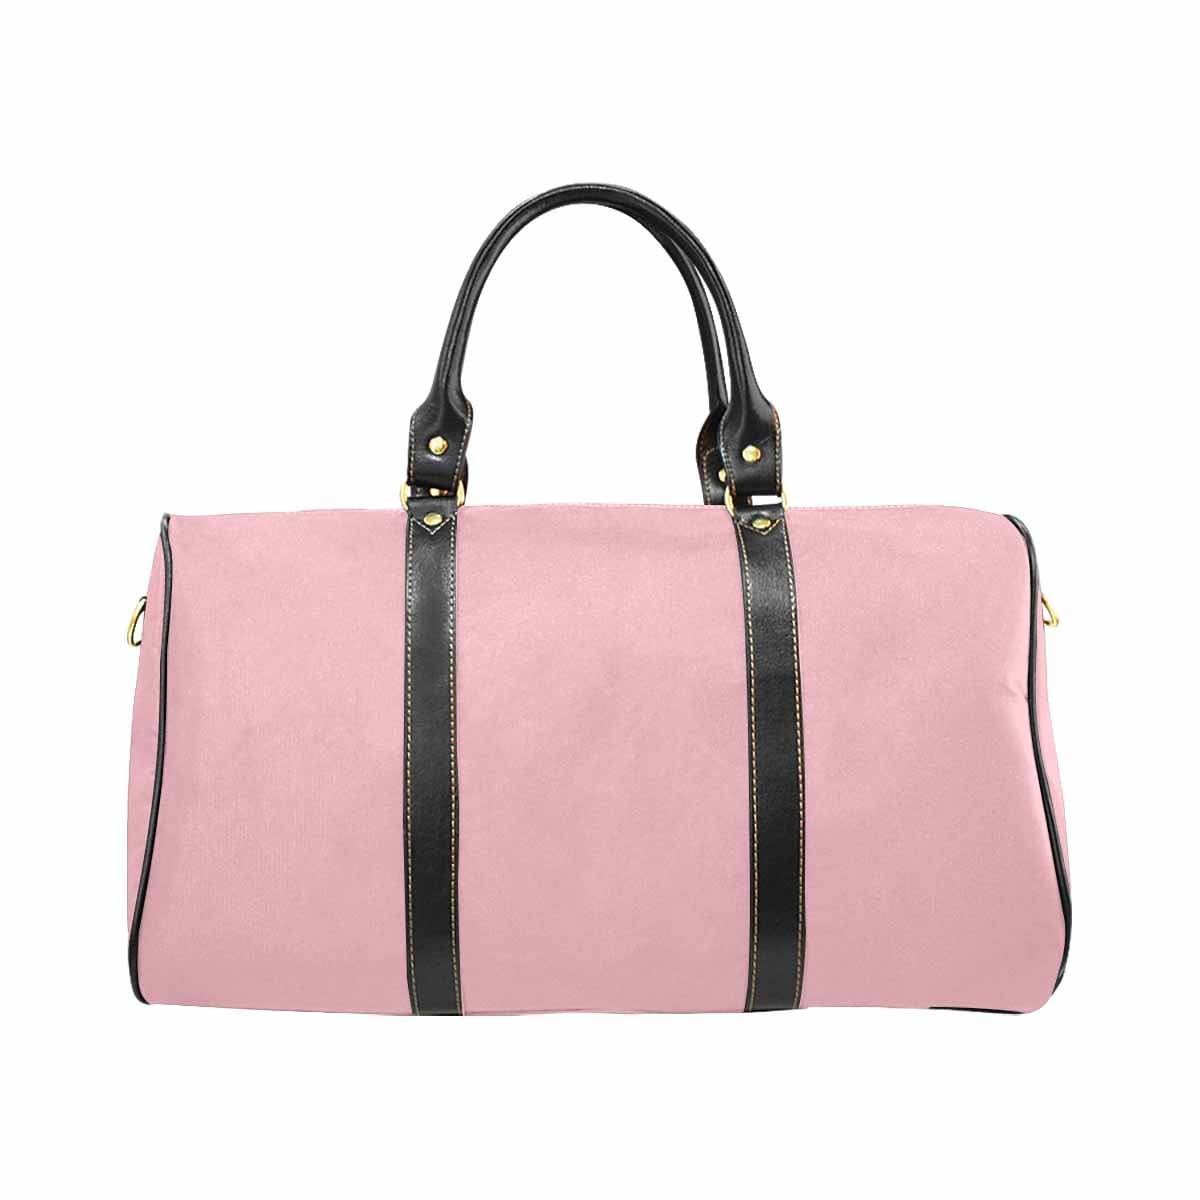 Pink Travel Bag Carry On Luggage Adjustable Strap Black - Bags | Travel Bags |